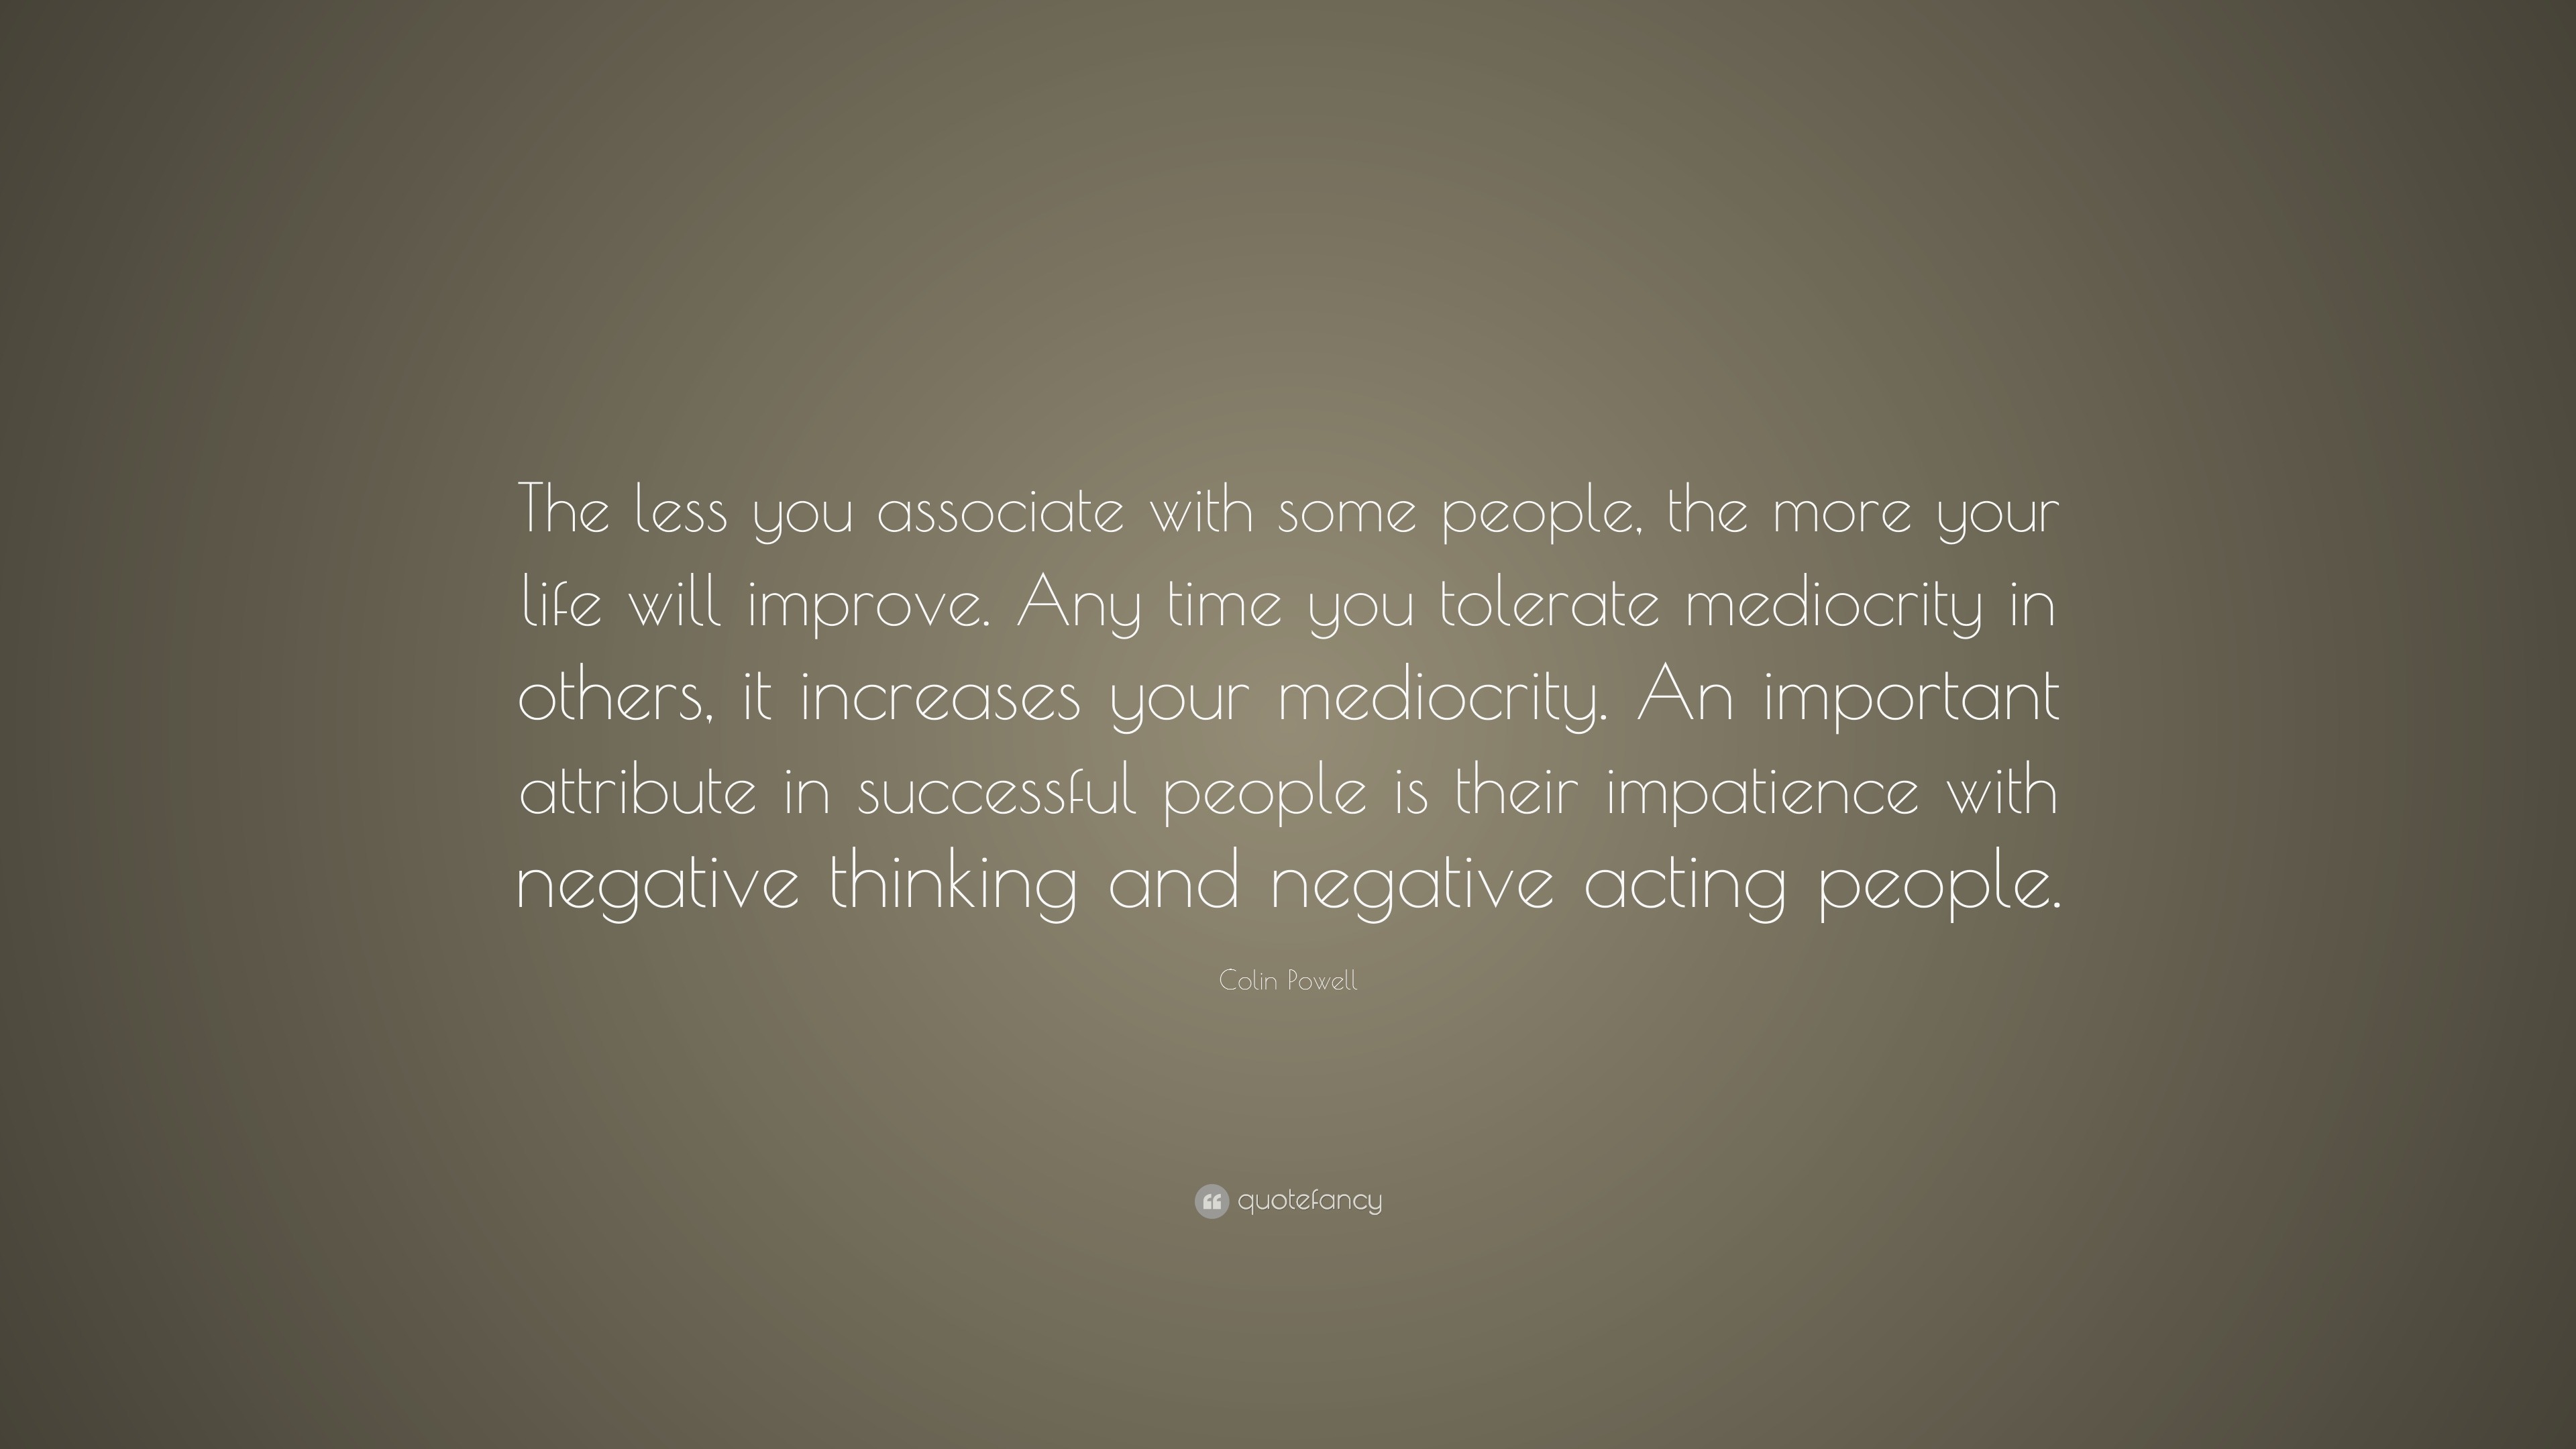 Colin Powell Quote “The less you associate with some people the more your